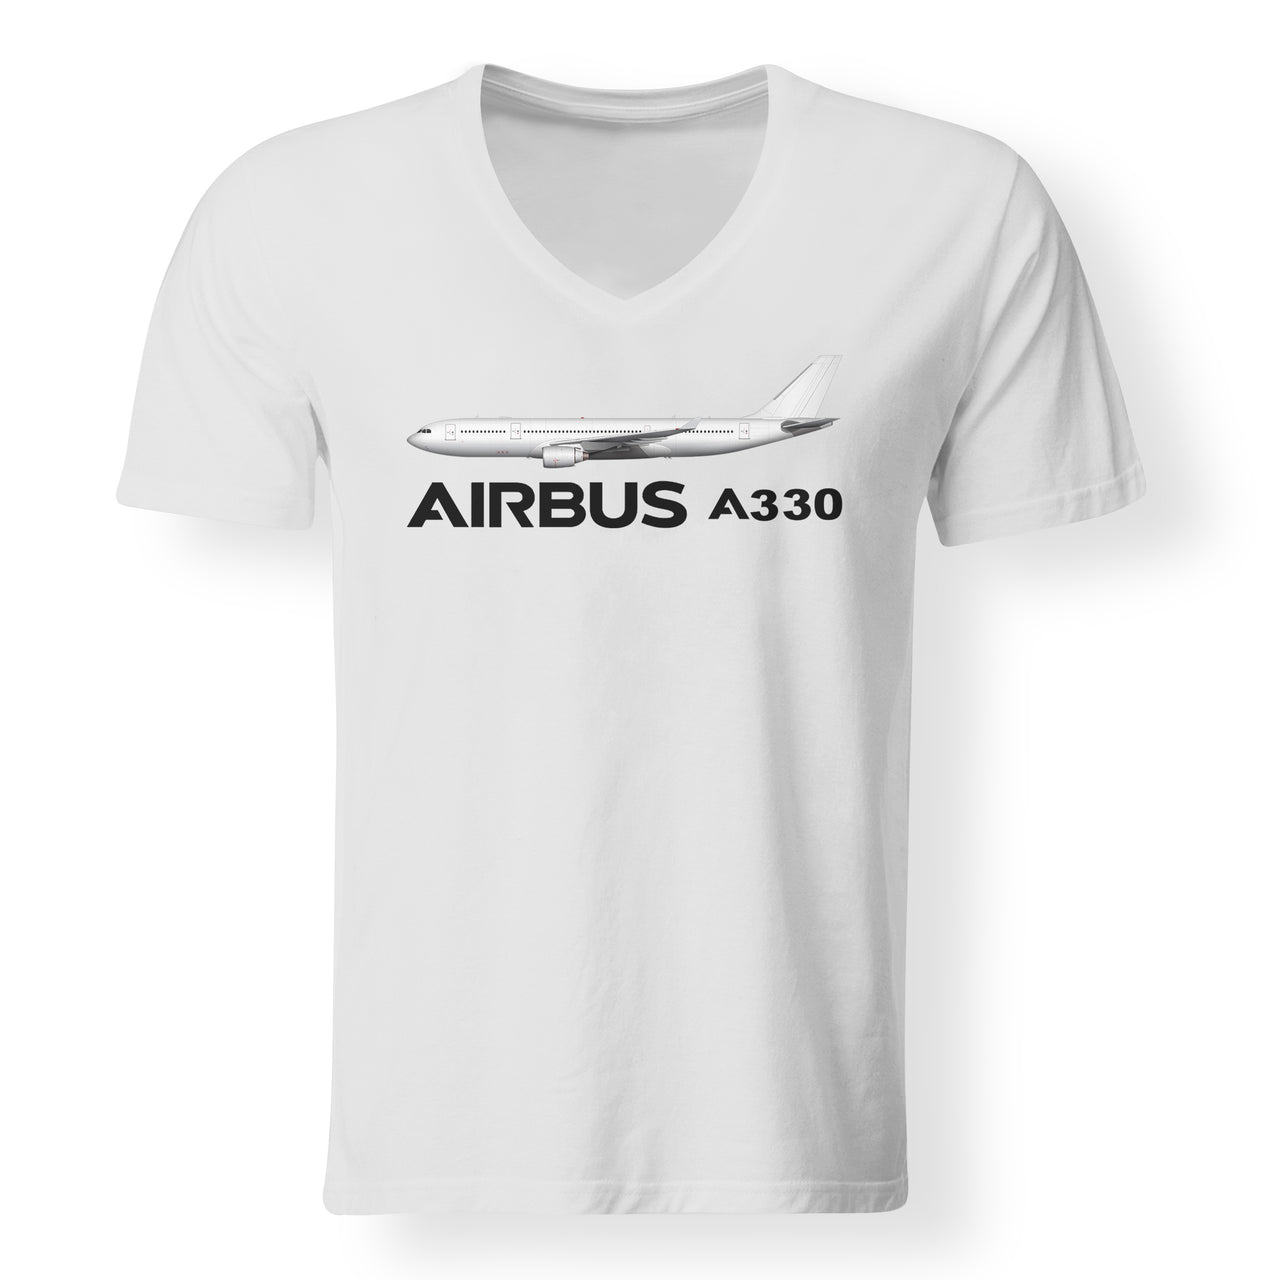 The Airbus A330 Designed V-Neck T-Shirts